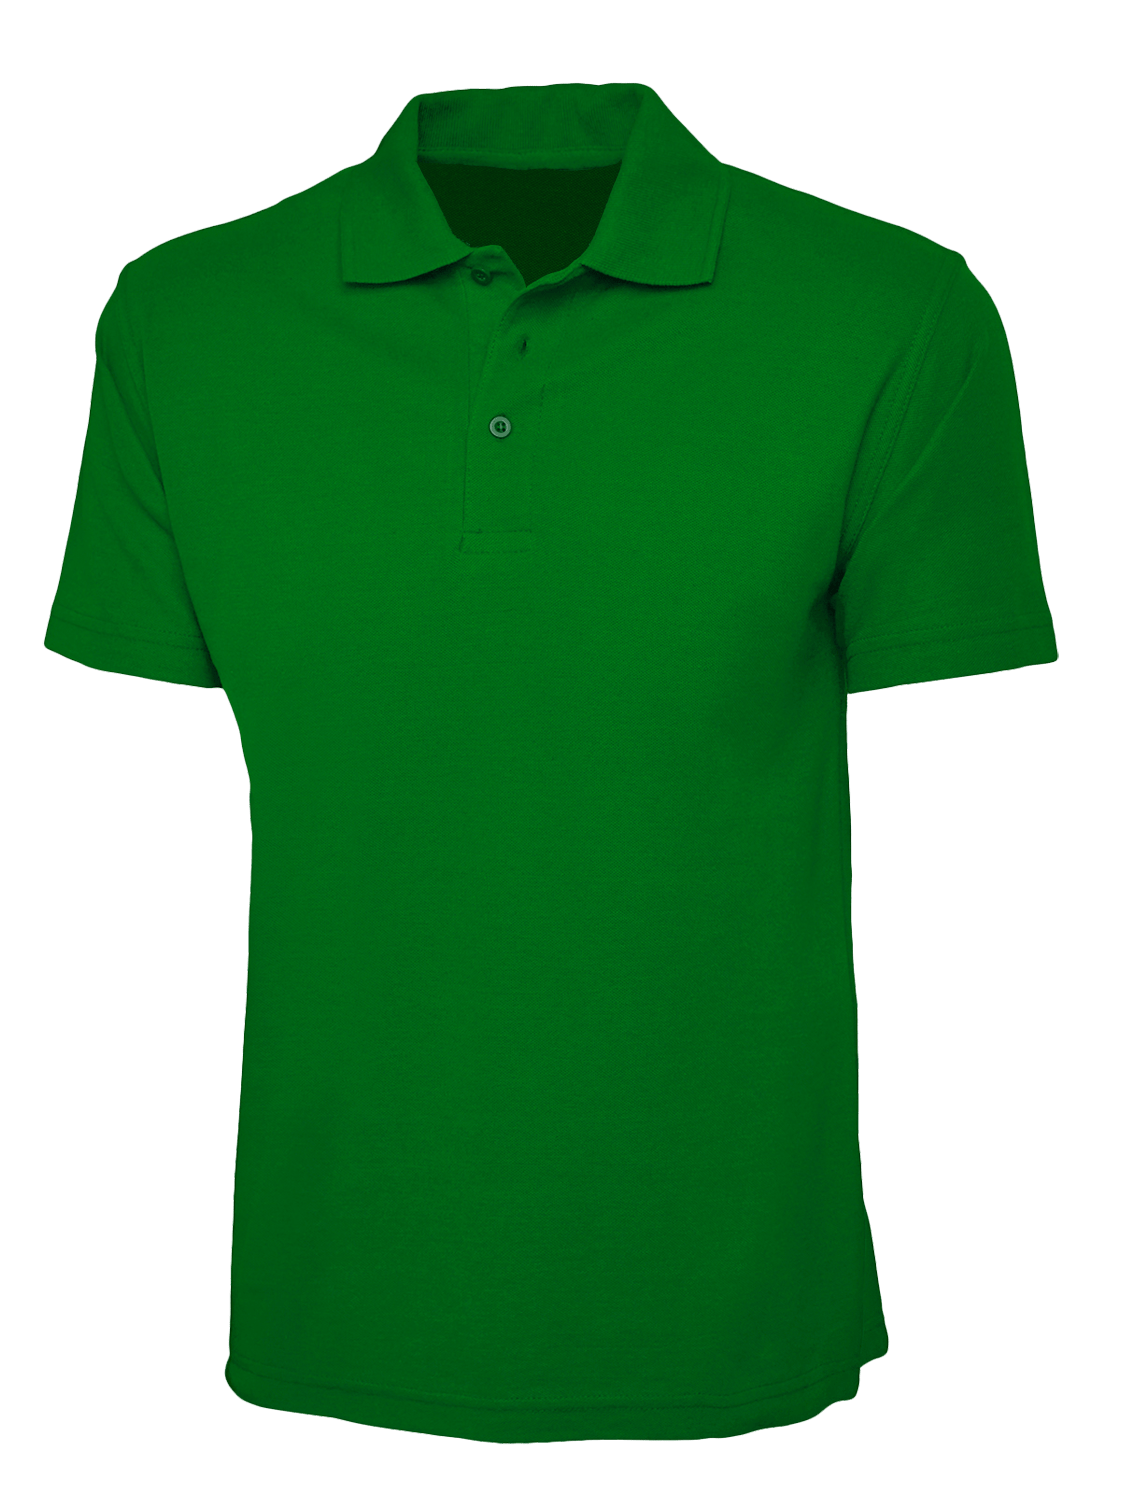 Polo Shirt PNG Free Download